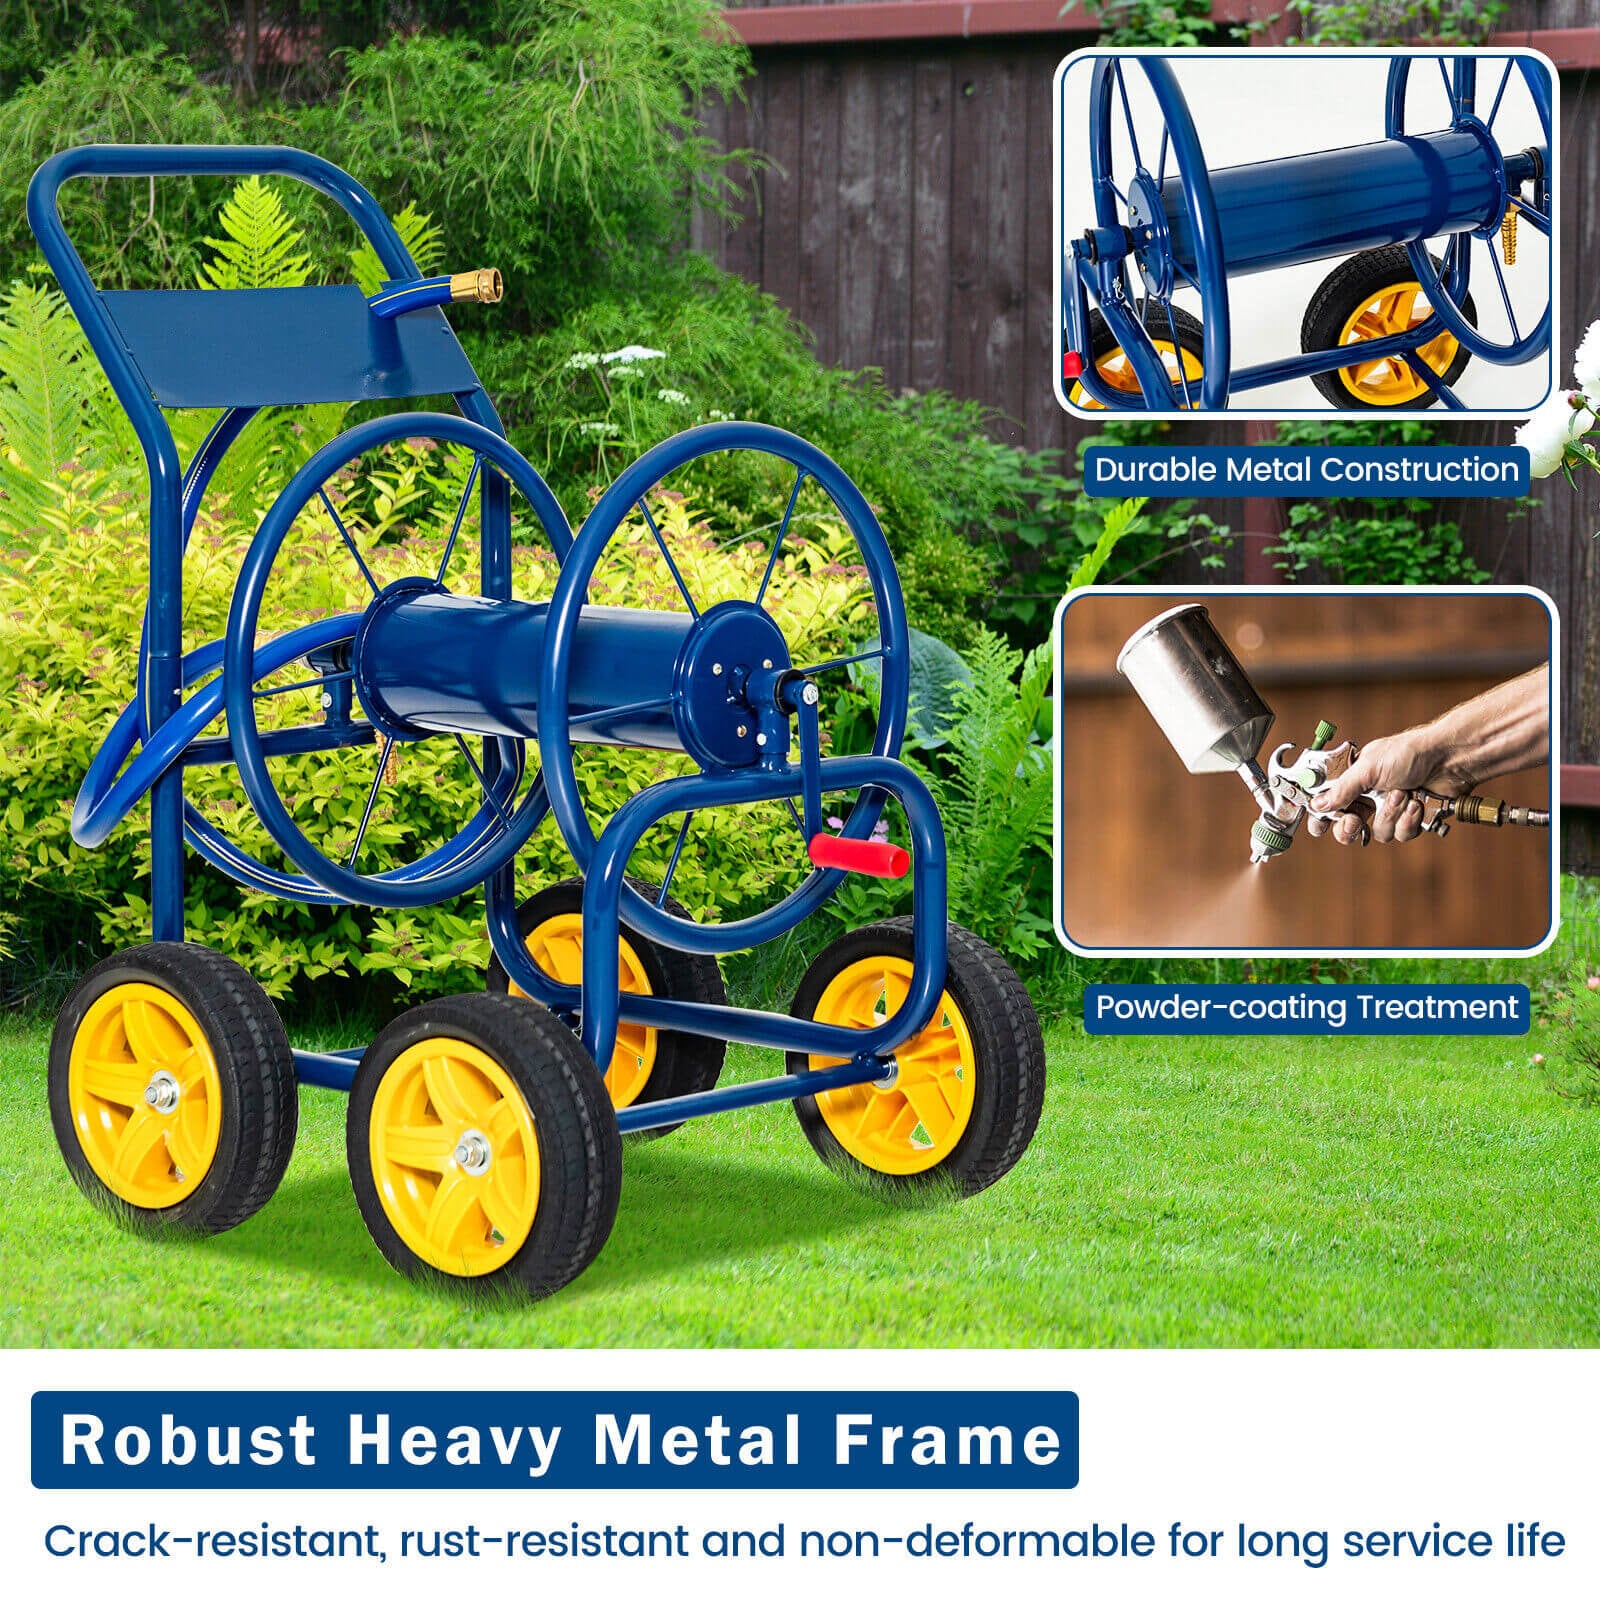 Giraffe Tools Steel Garden Hose Reel Cart with Hose Guide, 250 ft Capacity,  Manual Operation, Weather-Resistant, Rust-Proof